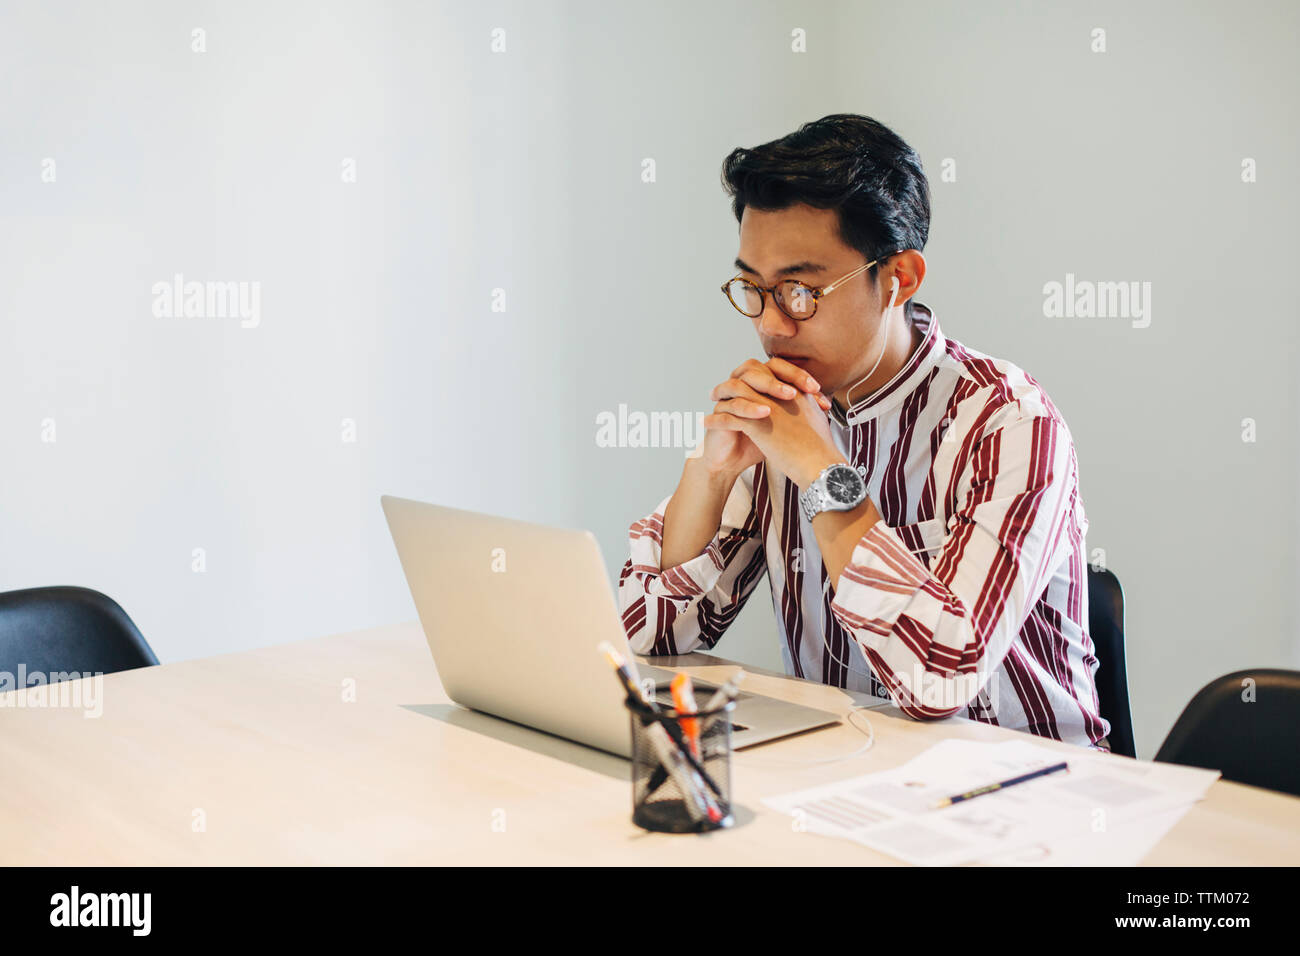 Serious businessman with hands clasped looking at laptop computer while sitting in board room Stock Photo